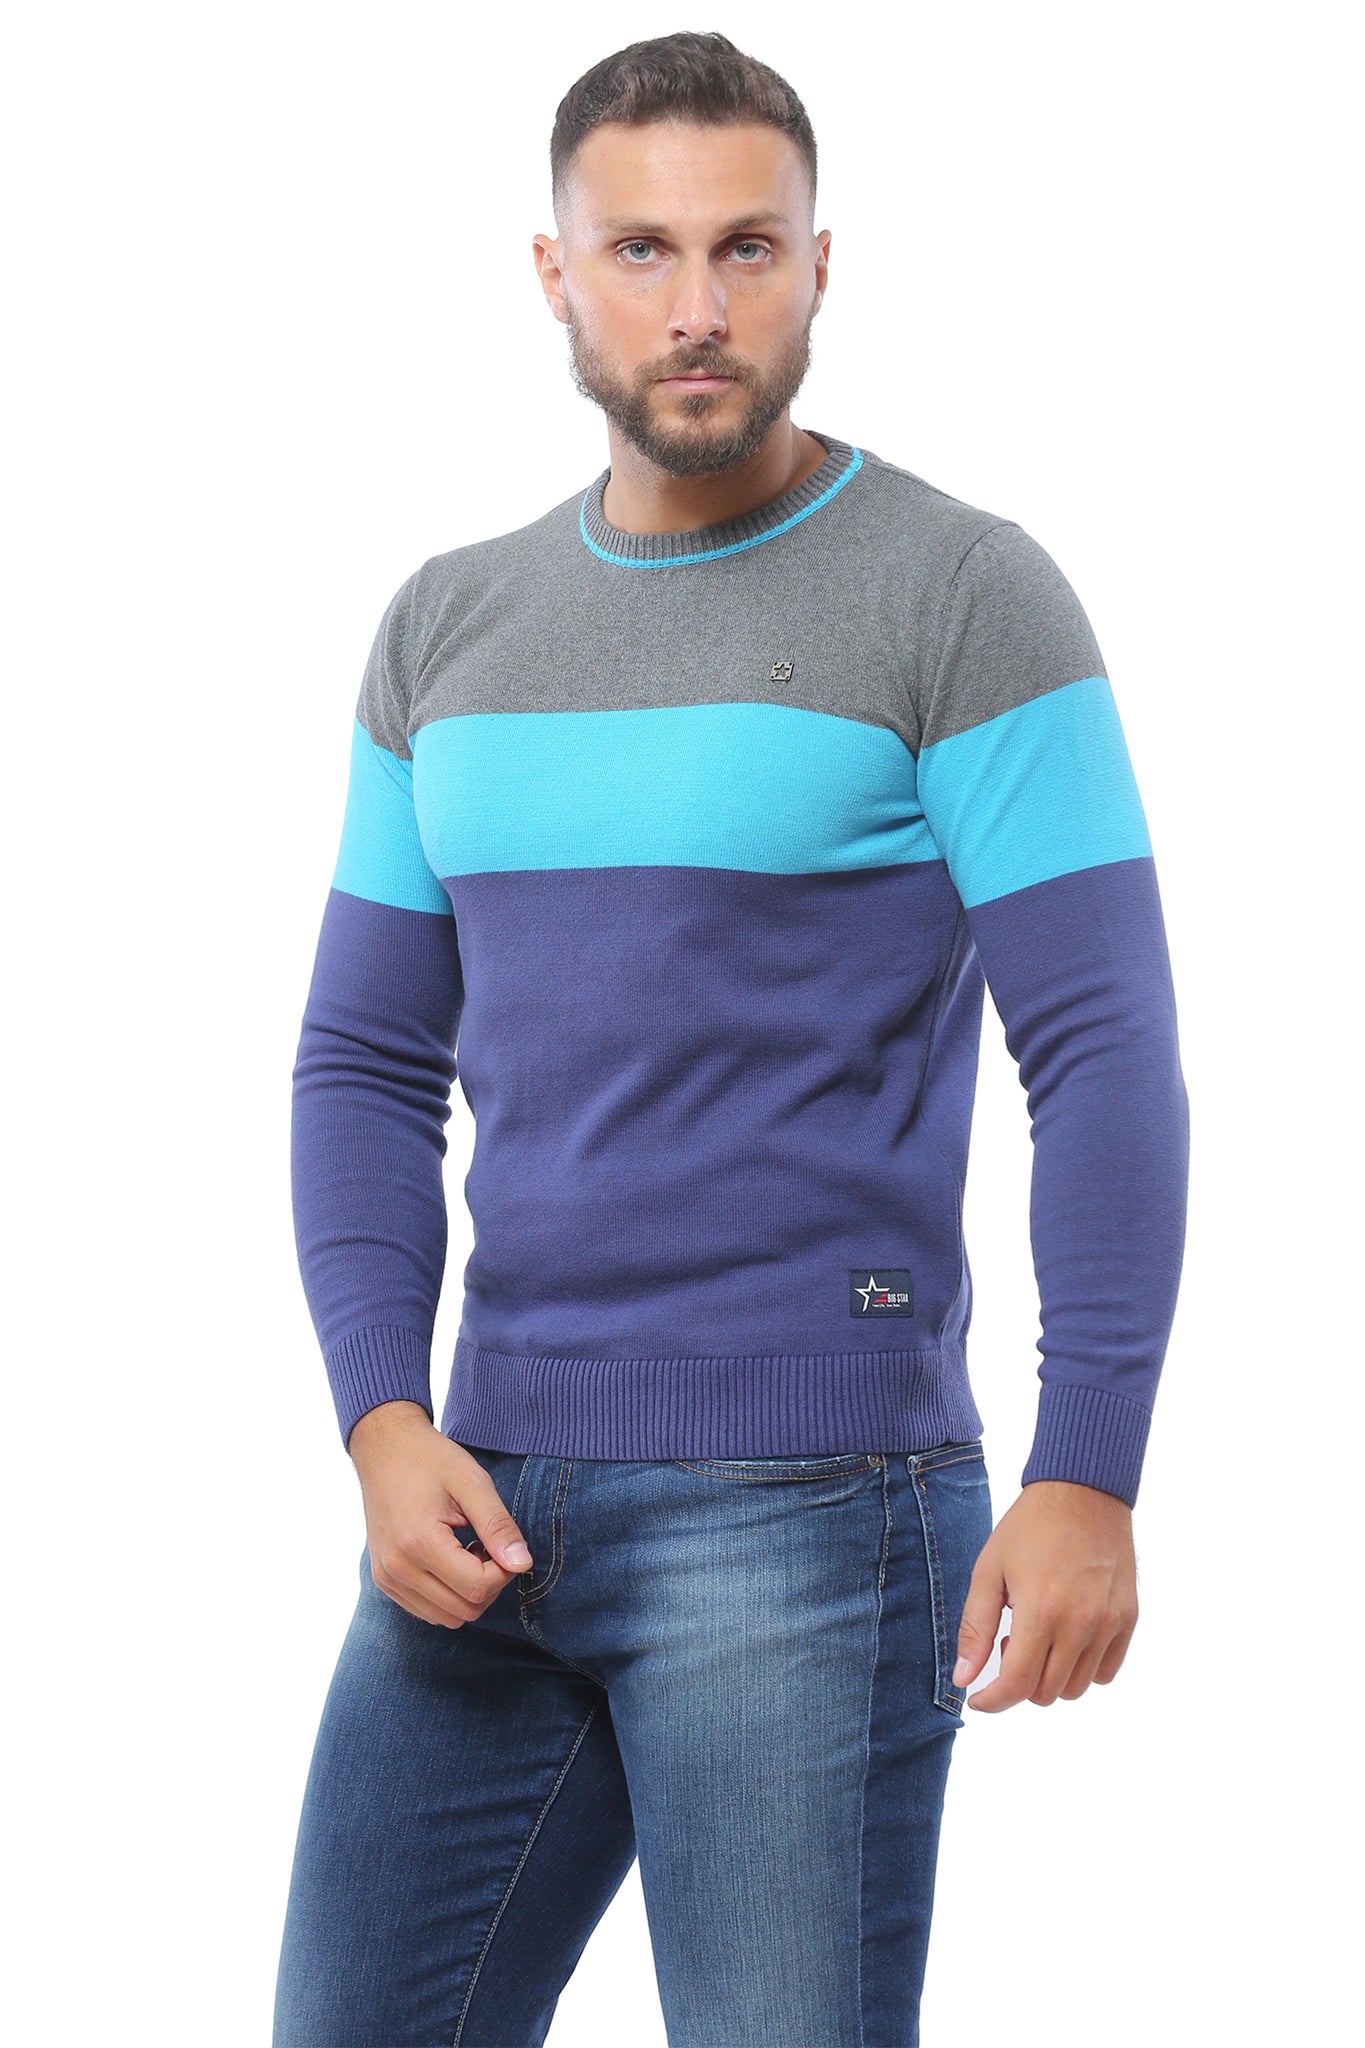 Sweater with Stripes | Navy with Blue and Grey